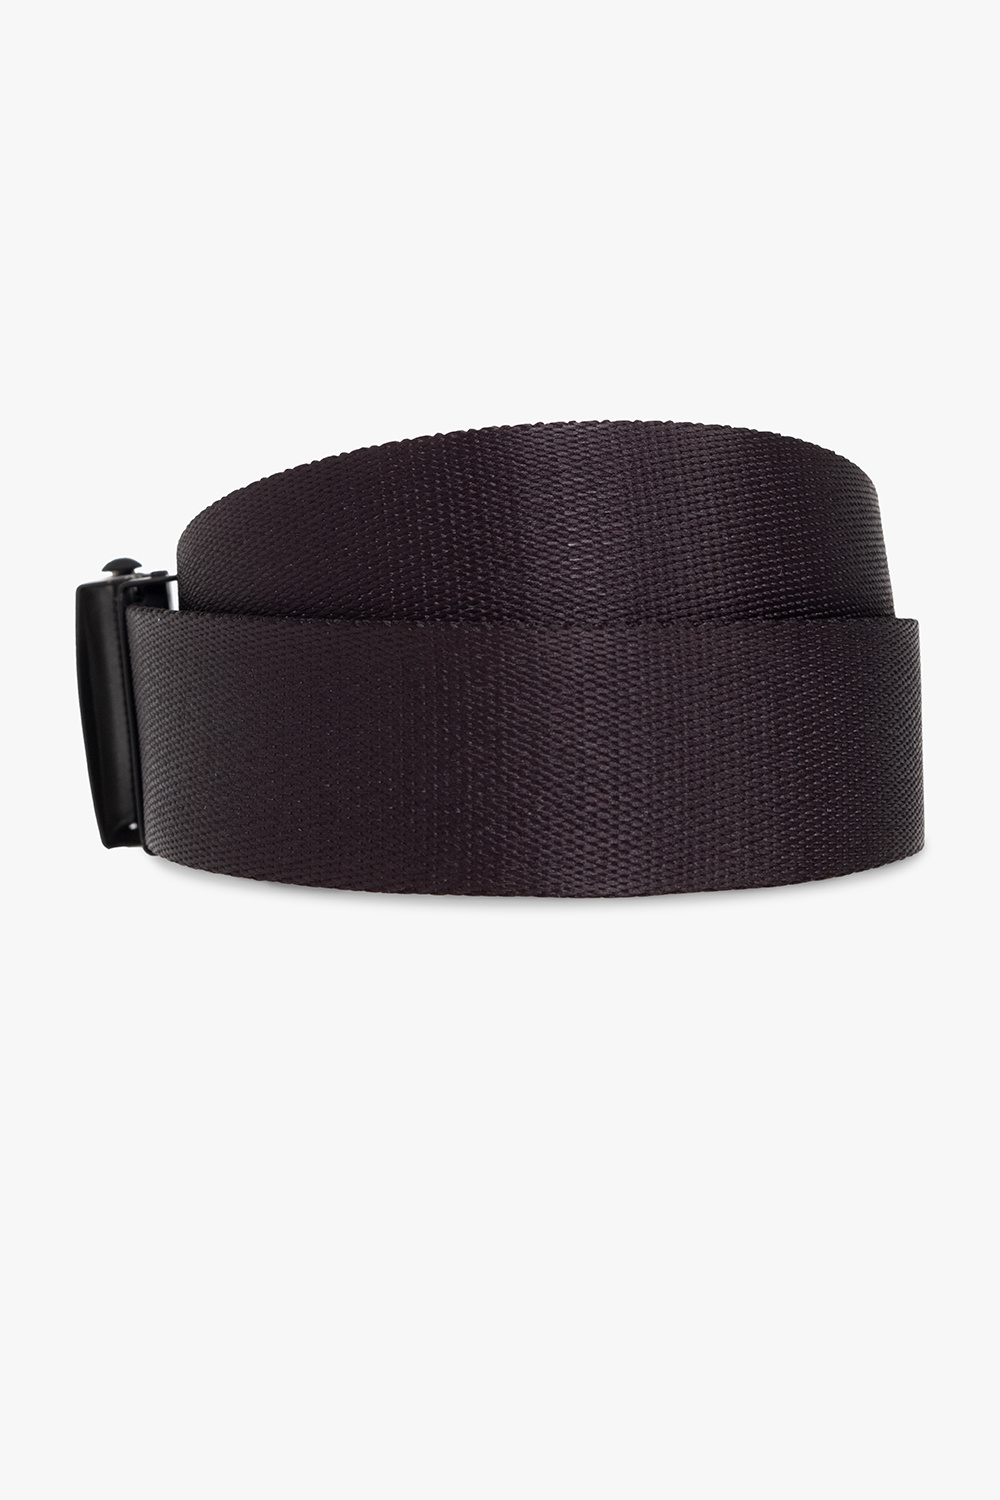 White Mountaineering Belt with logo